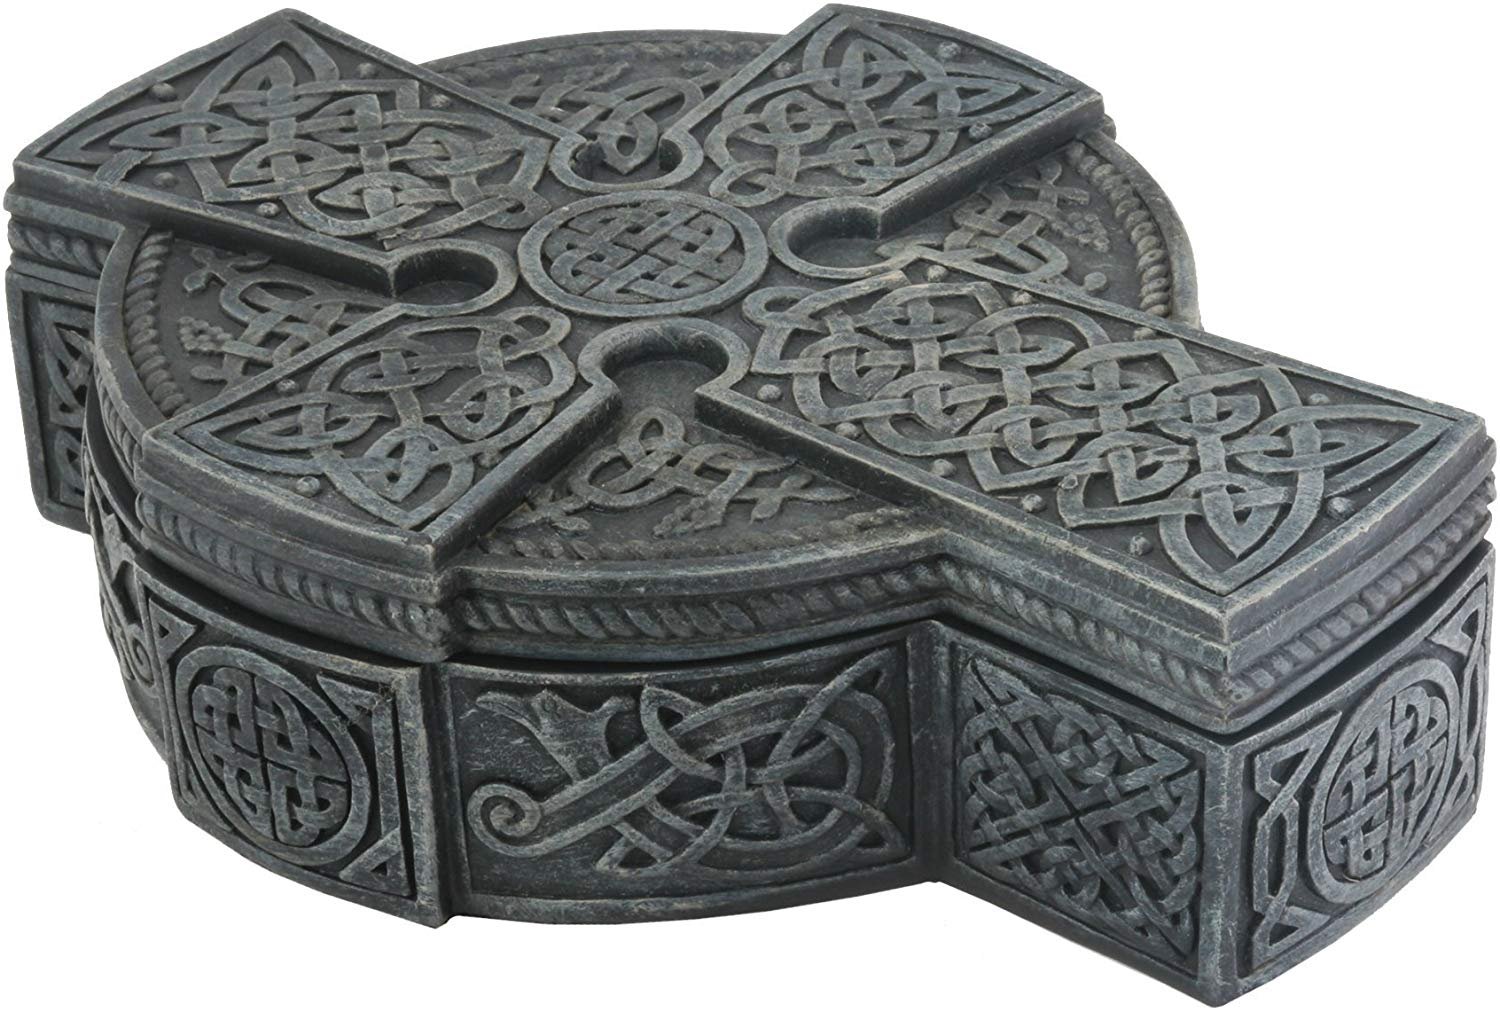 Celtic Cross Box - Collectible Tribal Container Statue Figurine